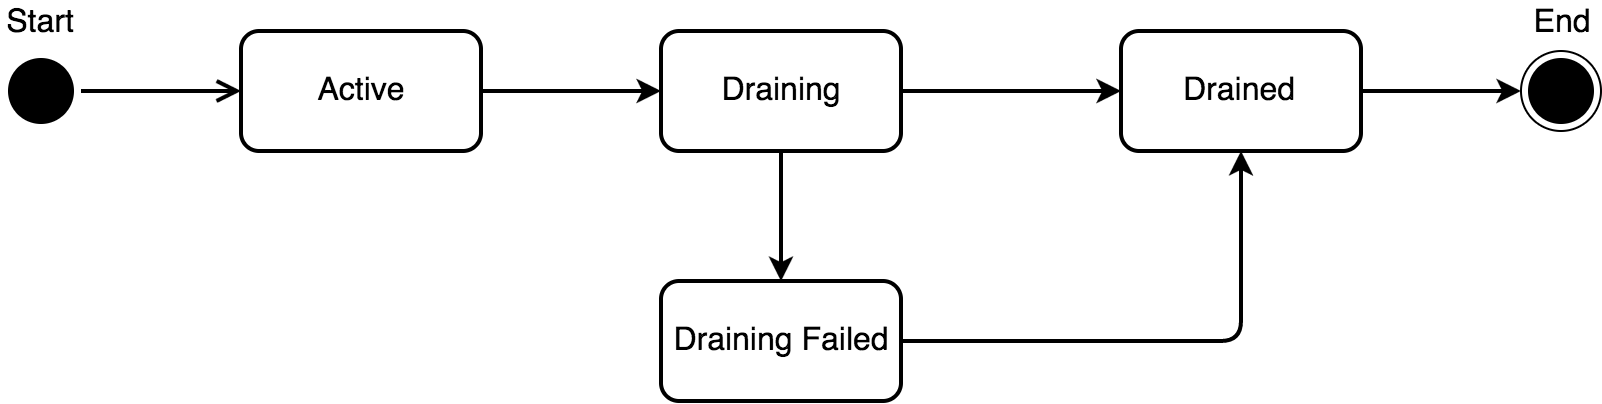 Lifecycle States